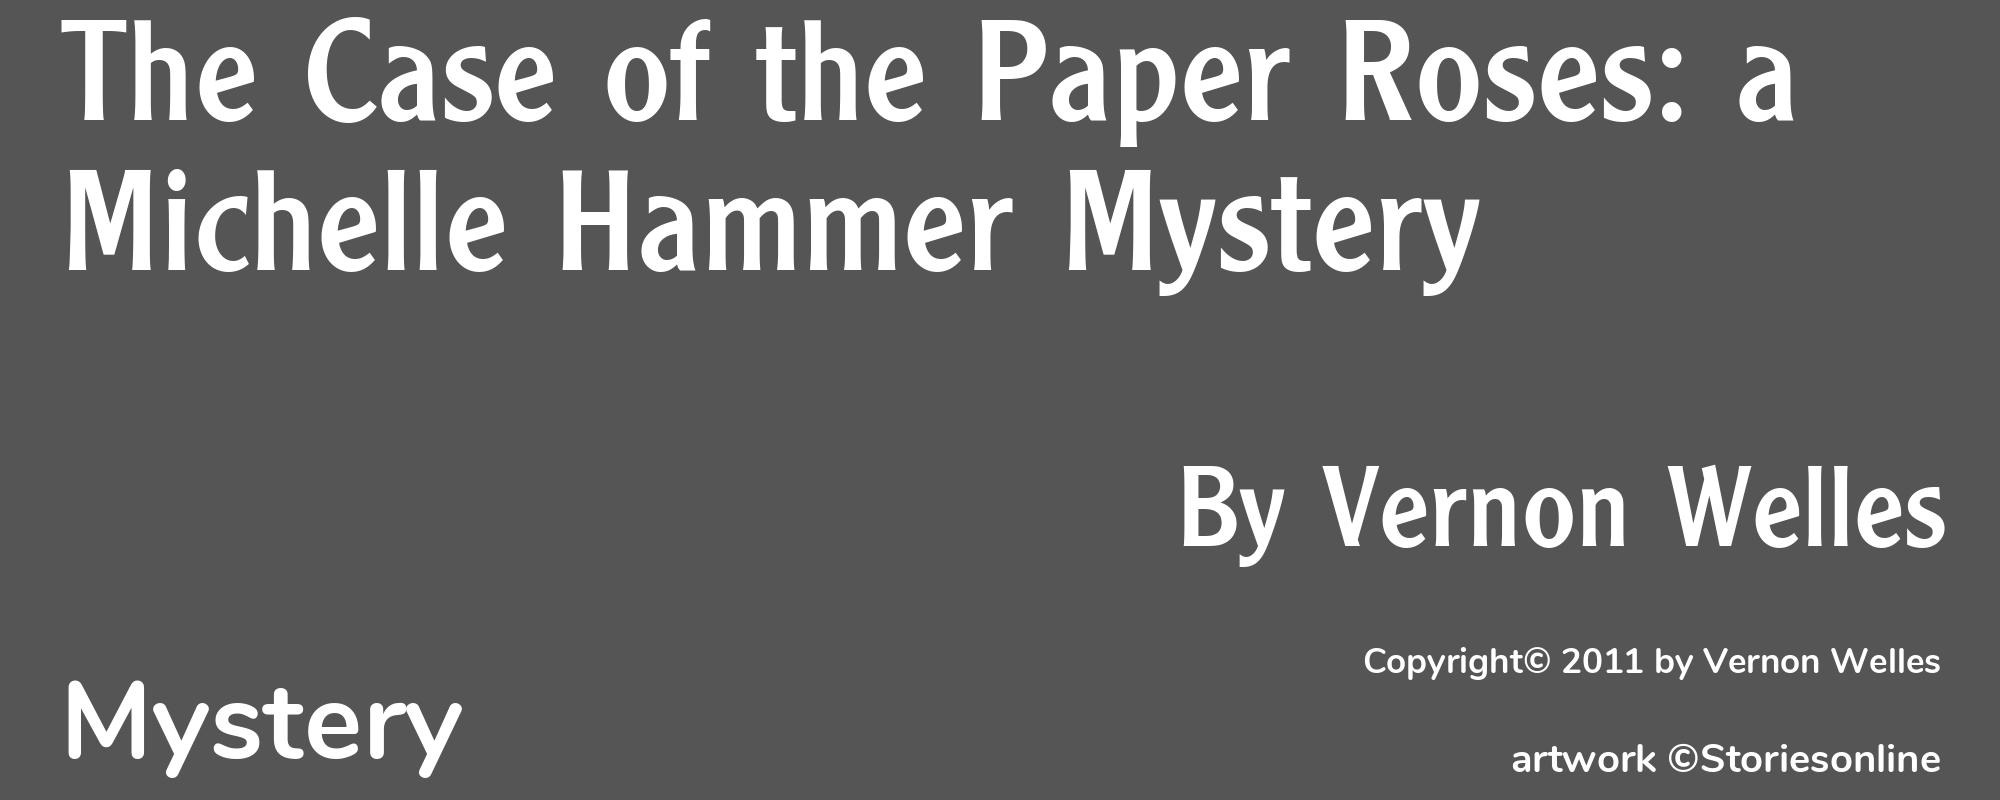 The Case of the Paper Roses: a Michelle Hammer Mystery - Cover